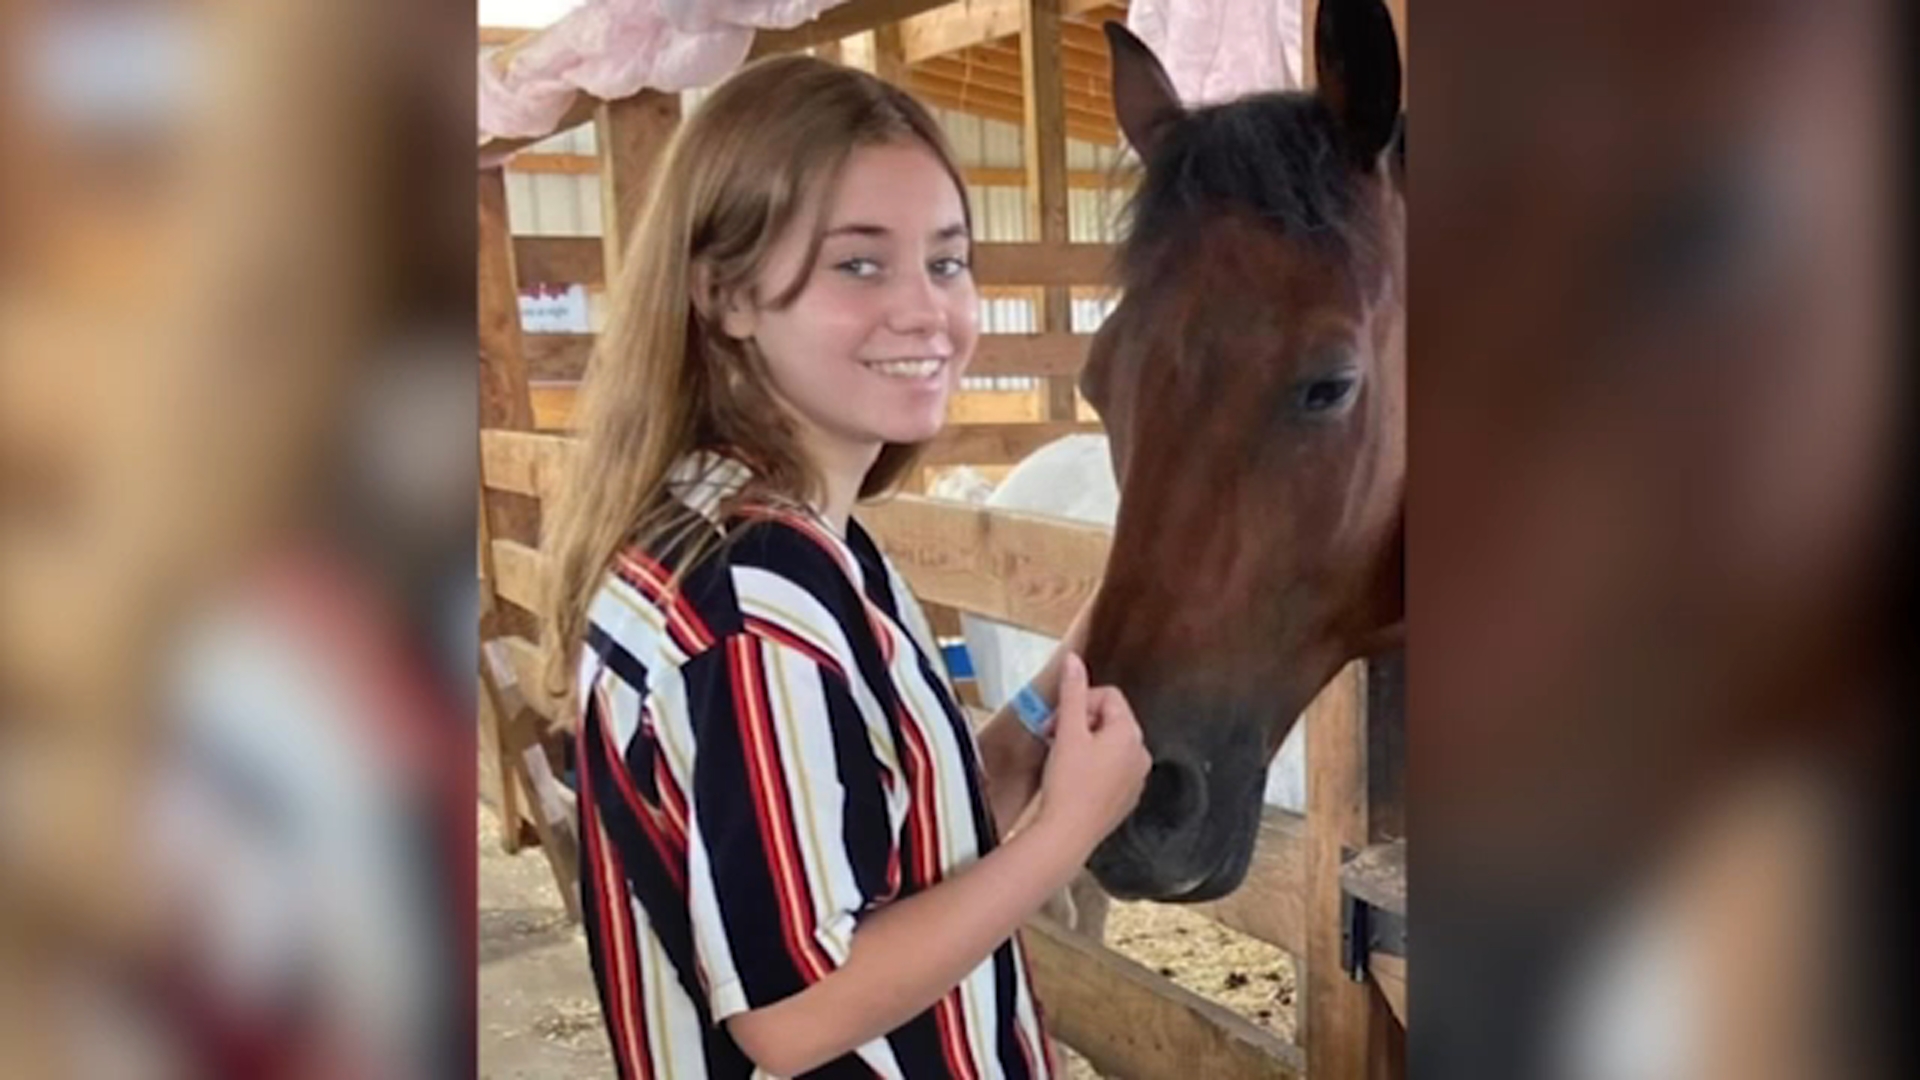 Father demands justice for daughter who took her life after video of school bullying surfaced